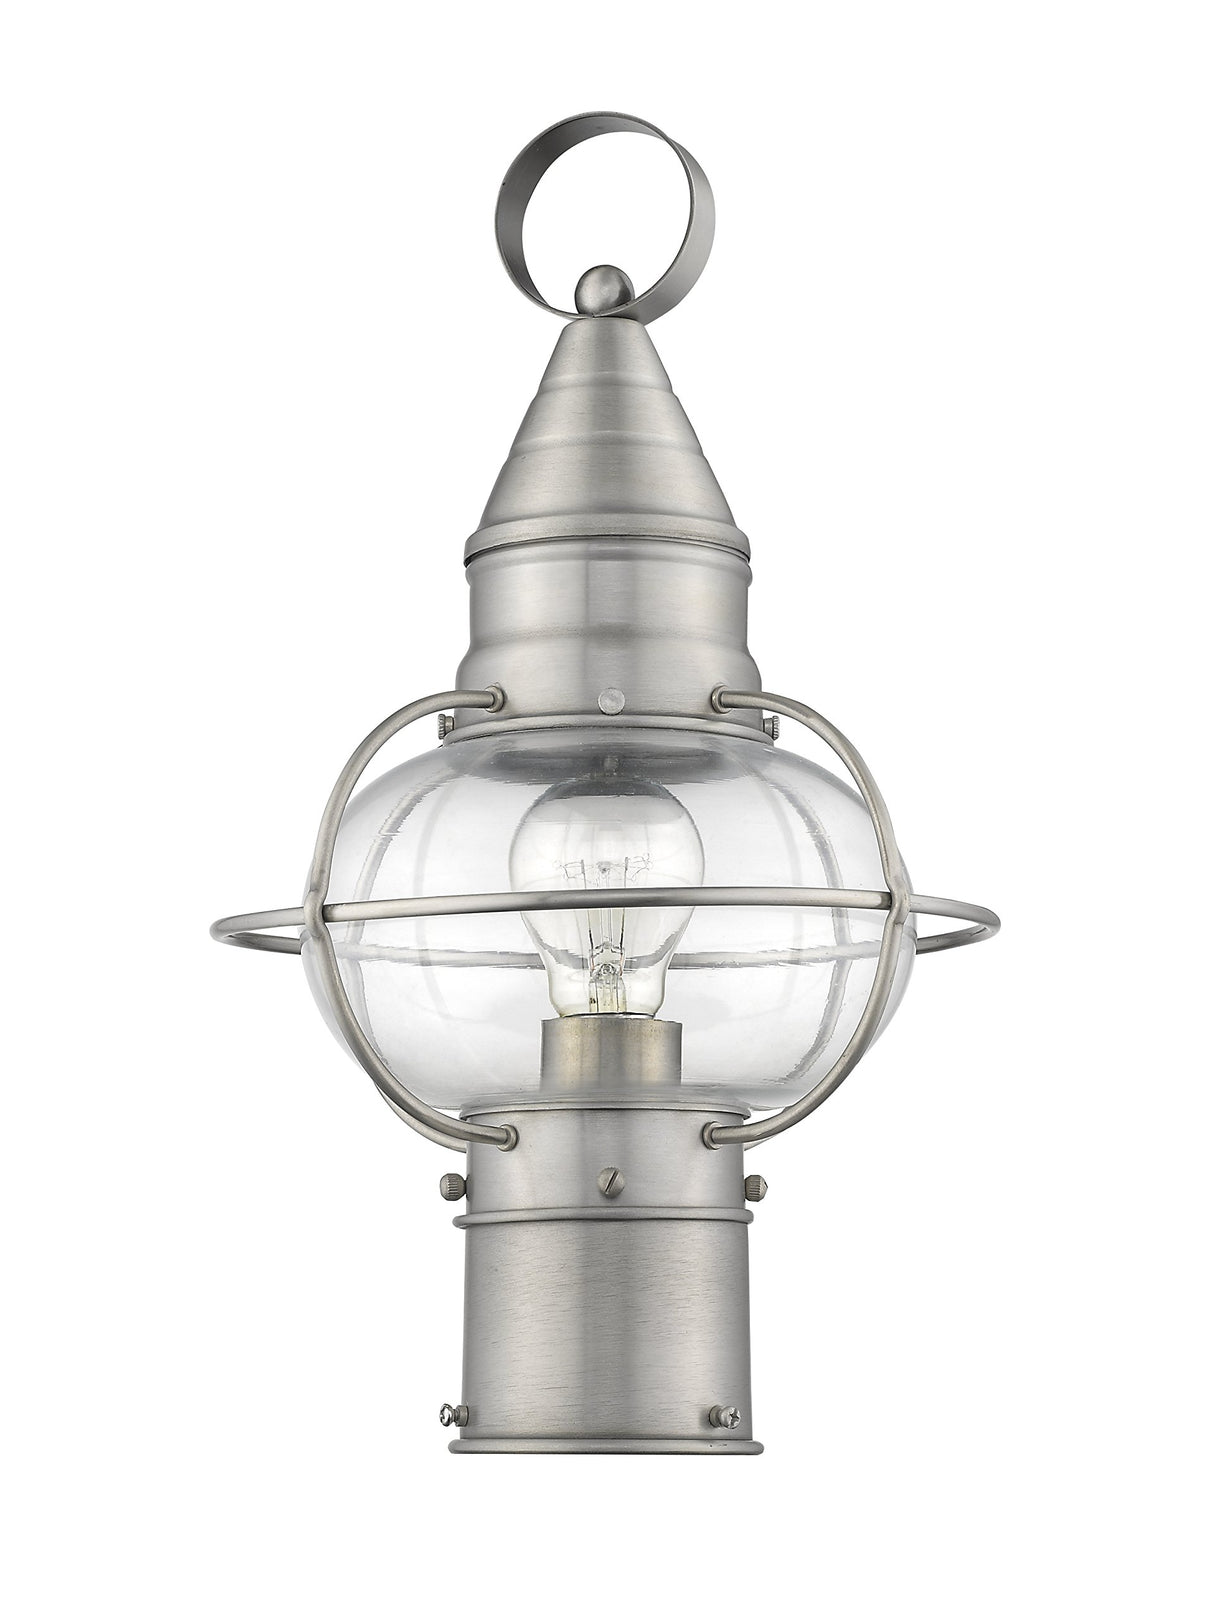 Livex 26902-91 Transitional One Light Outdoor Post-Top Lanterm from Newburyport Collection in Pwt, Nckl, B/S, Slvr. Finish, Brushed Nickel